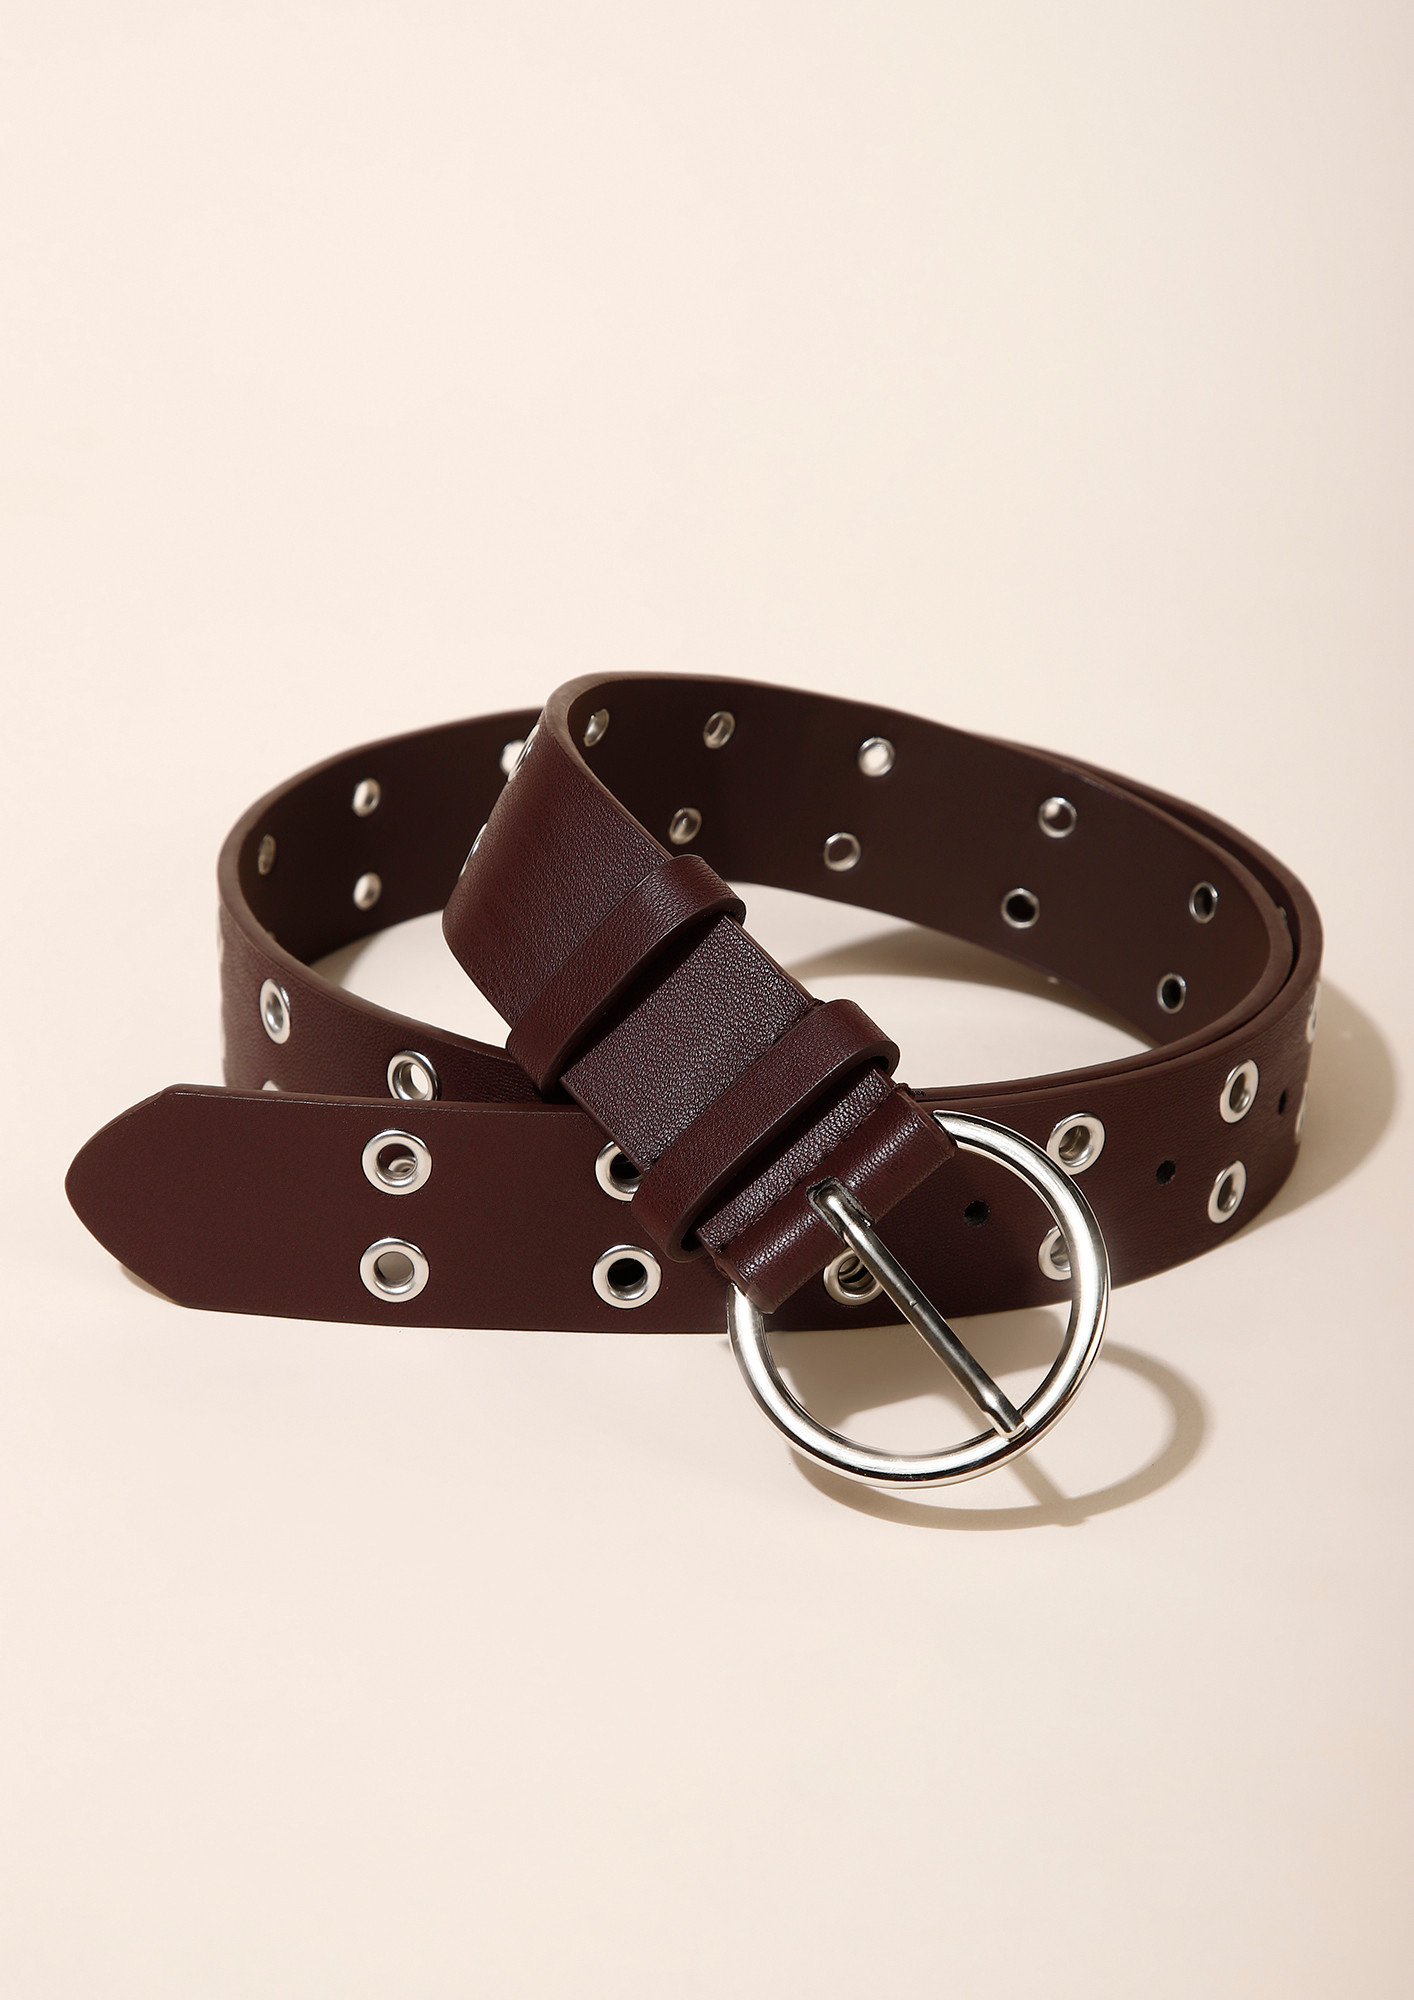 DOUBLE UP THE EDGE BROWN BELT